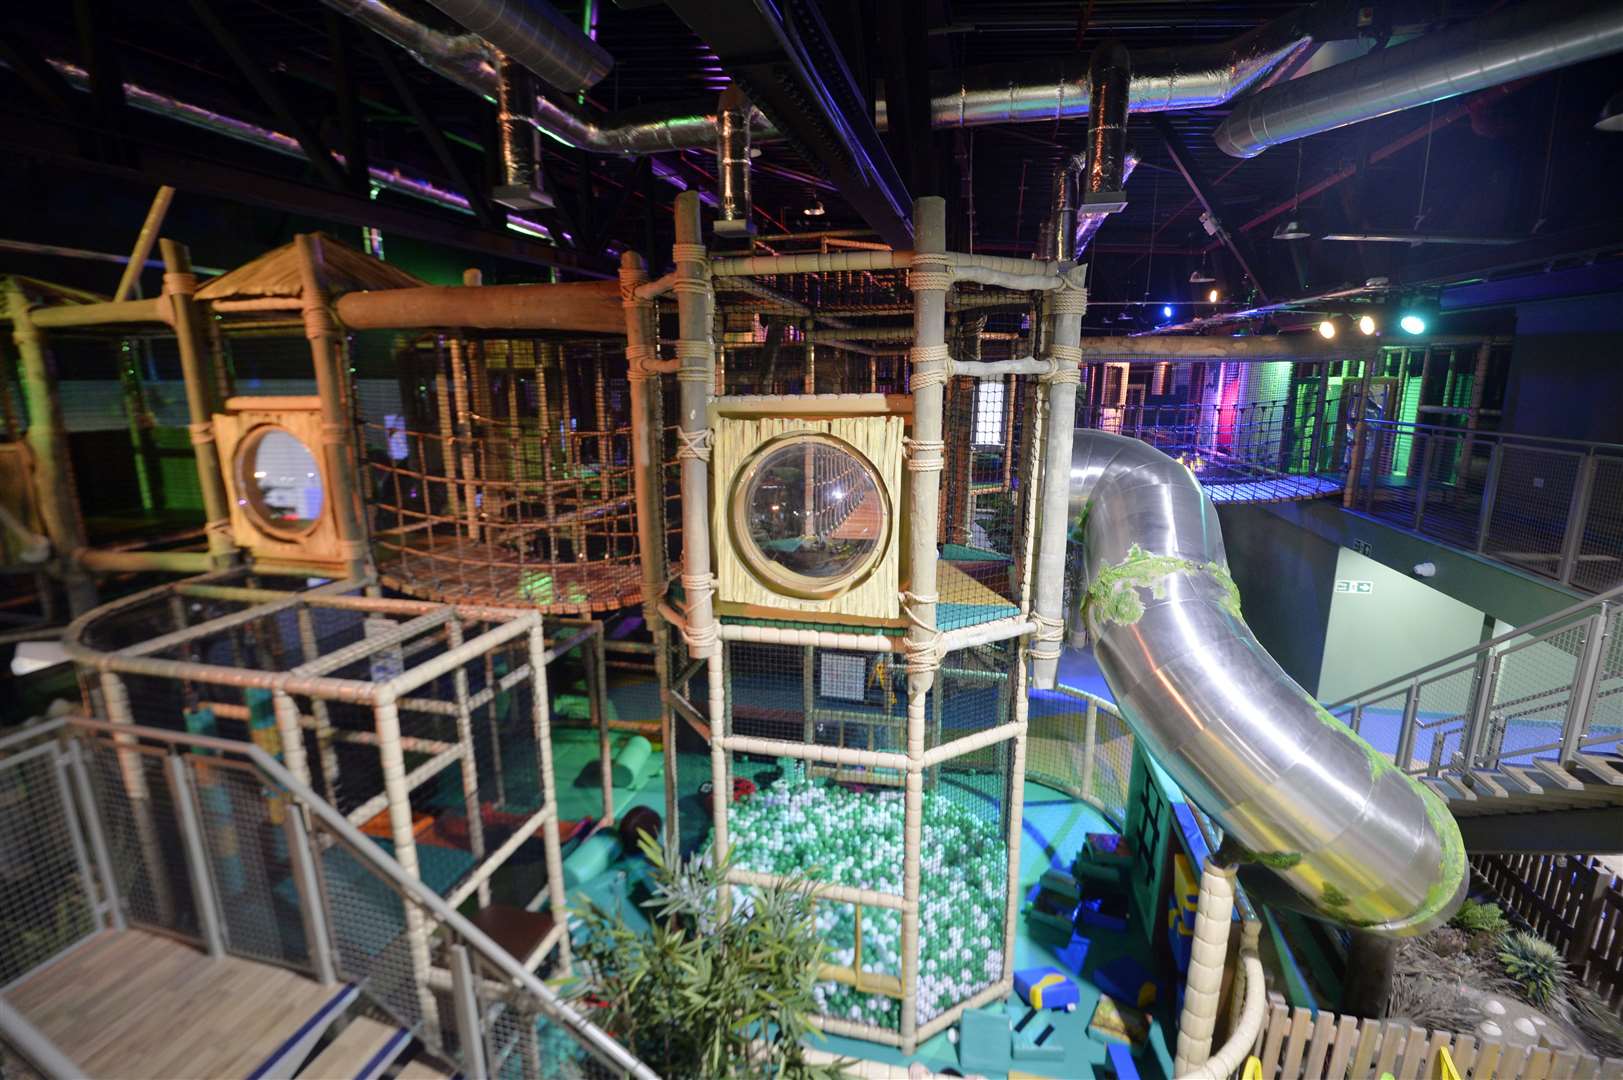 Dinotropolis is an indoor soft play area with Jurassic activities in Bluewater shopping centre. Picture: The Imageworks